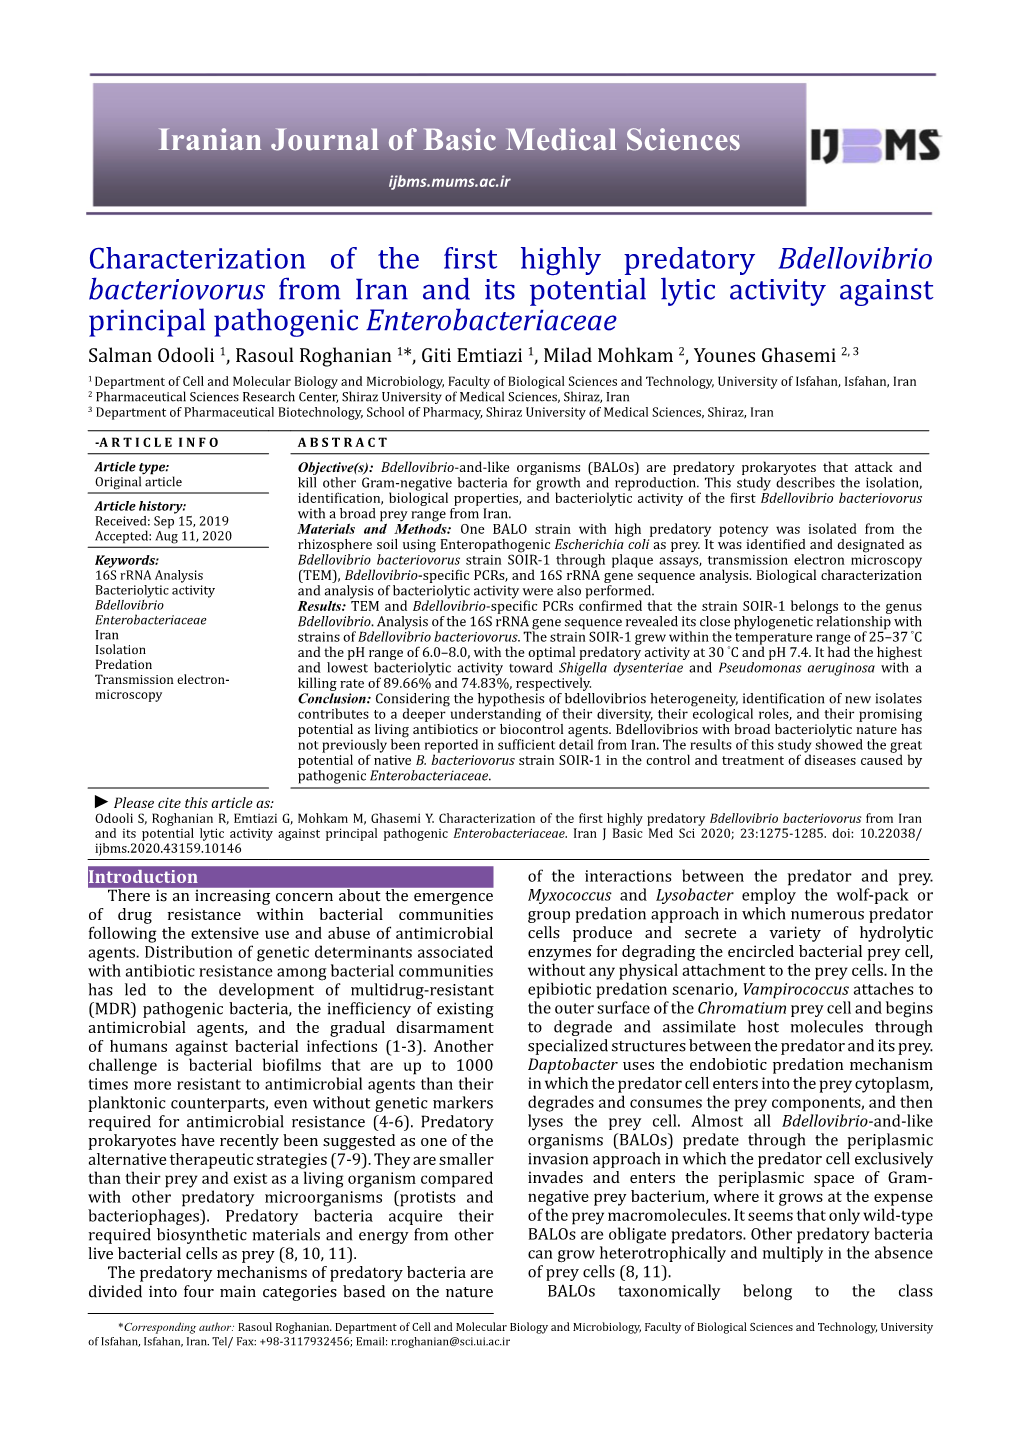 Characterization of the First Highly Predatory Bdellovibrio